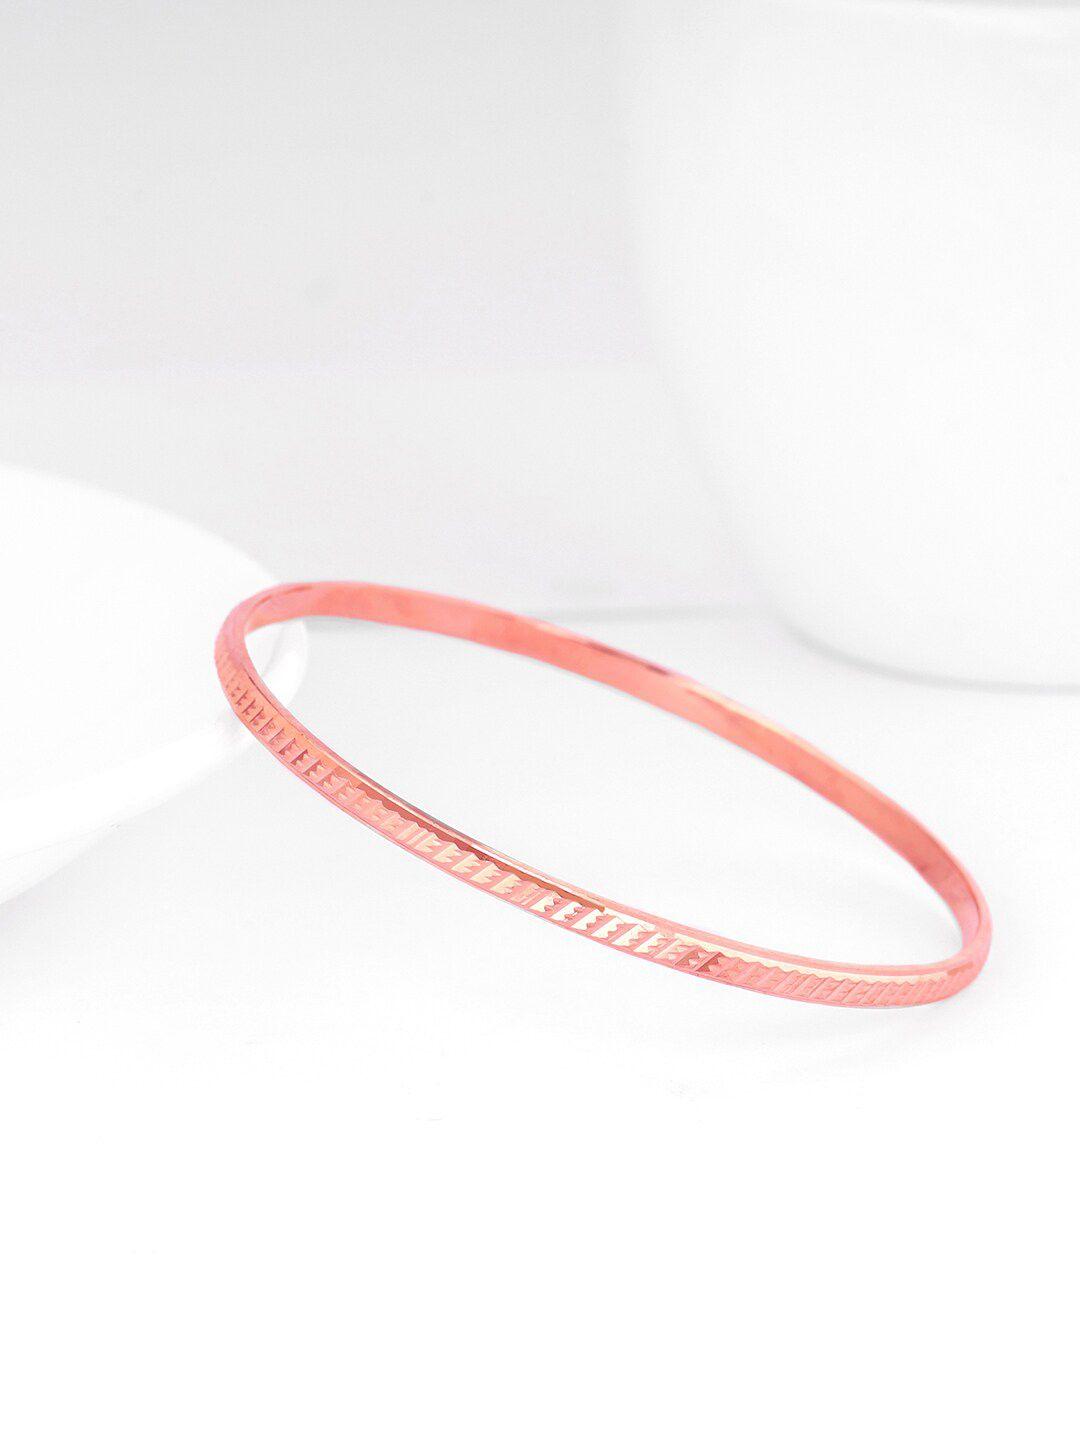 giva 925 sterling silver rose gold-plated bangle